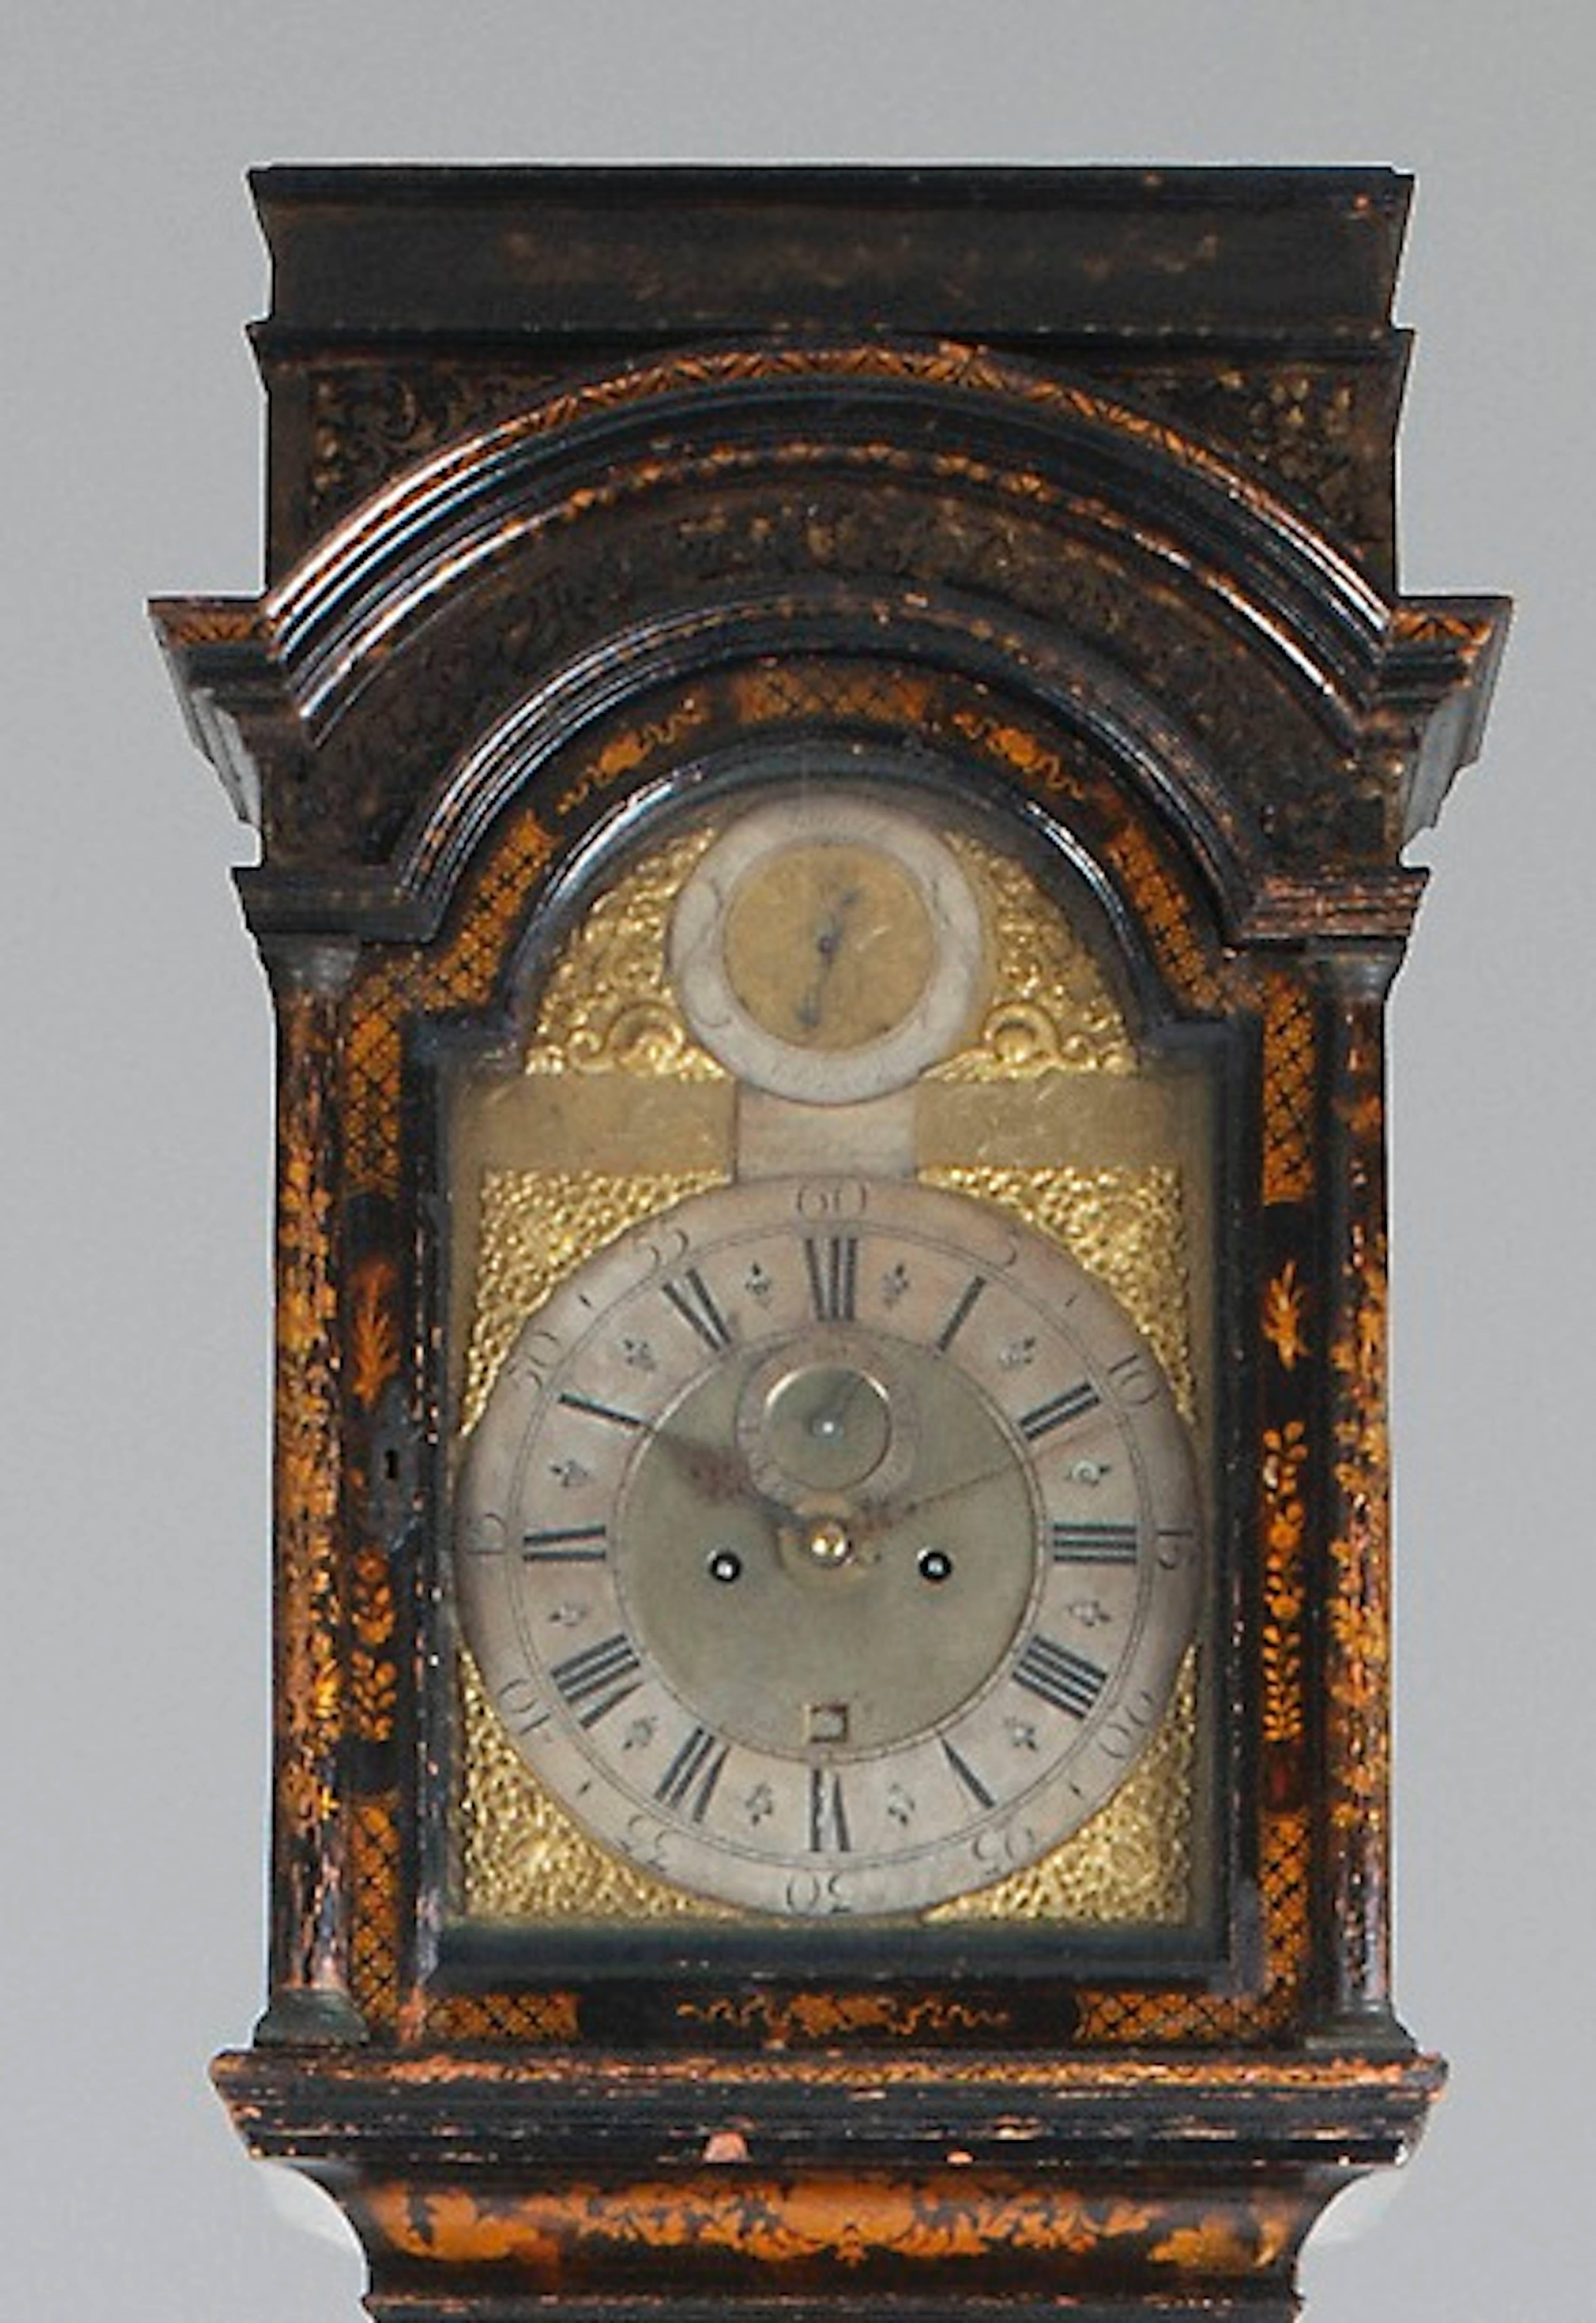 Longcase clock by Alexander Giroust, circa 1730. Oak lacquered case with "Chinoserie" the dial signed: Alex Giroust, Coventry Street, London. Lacquer needs restoration.